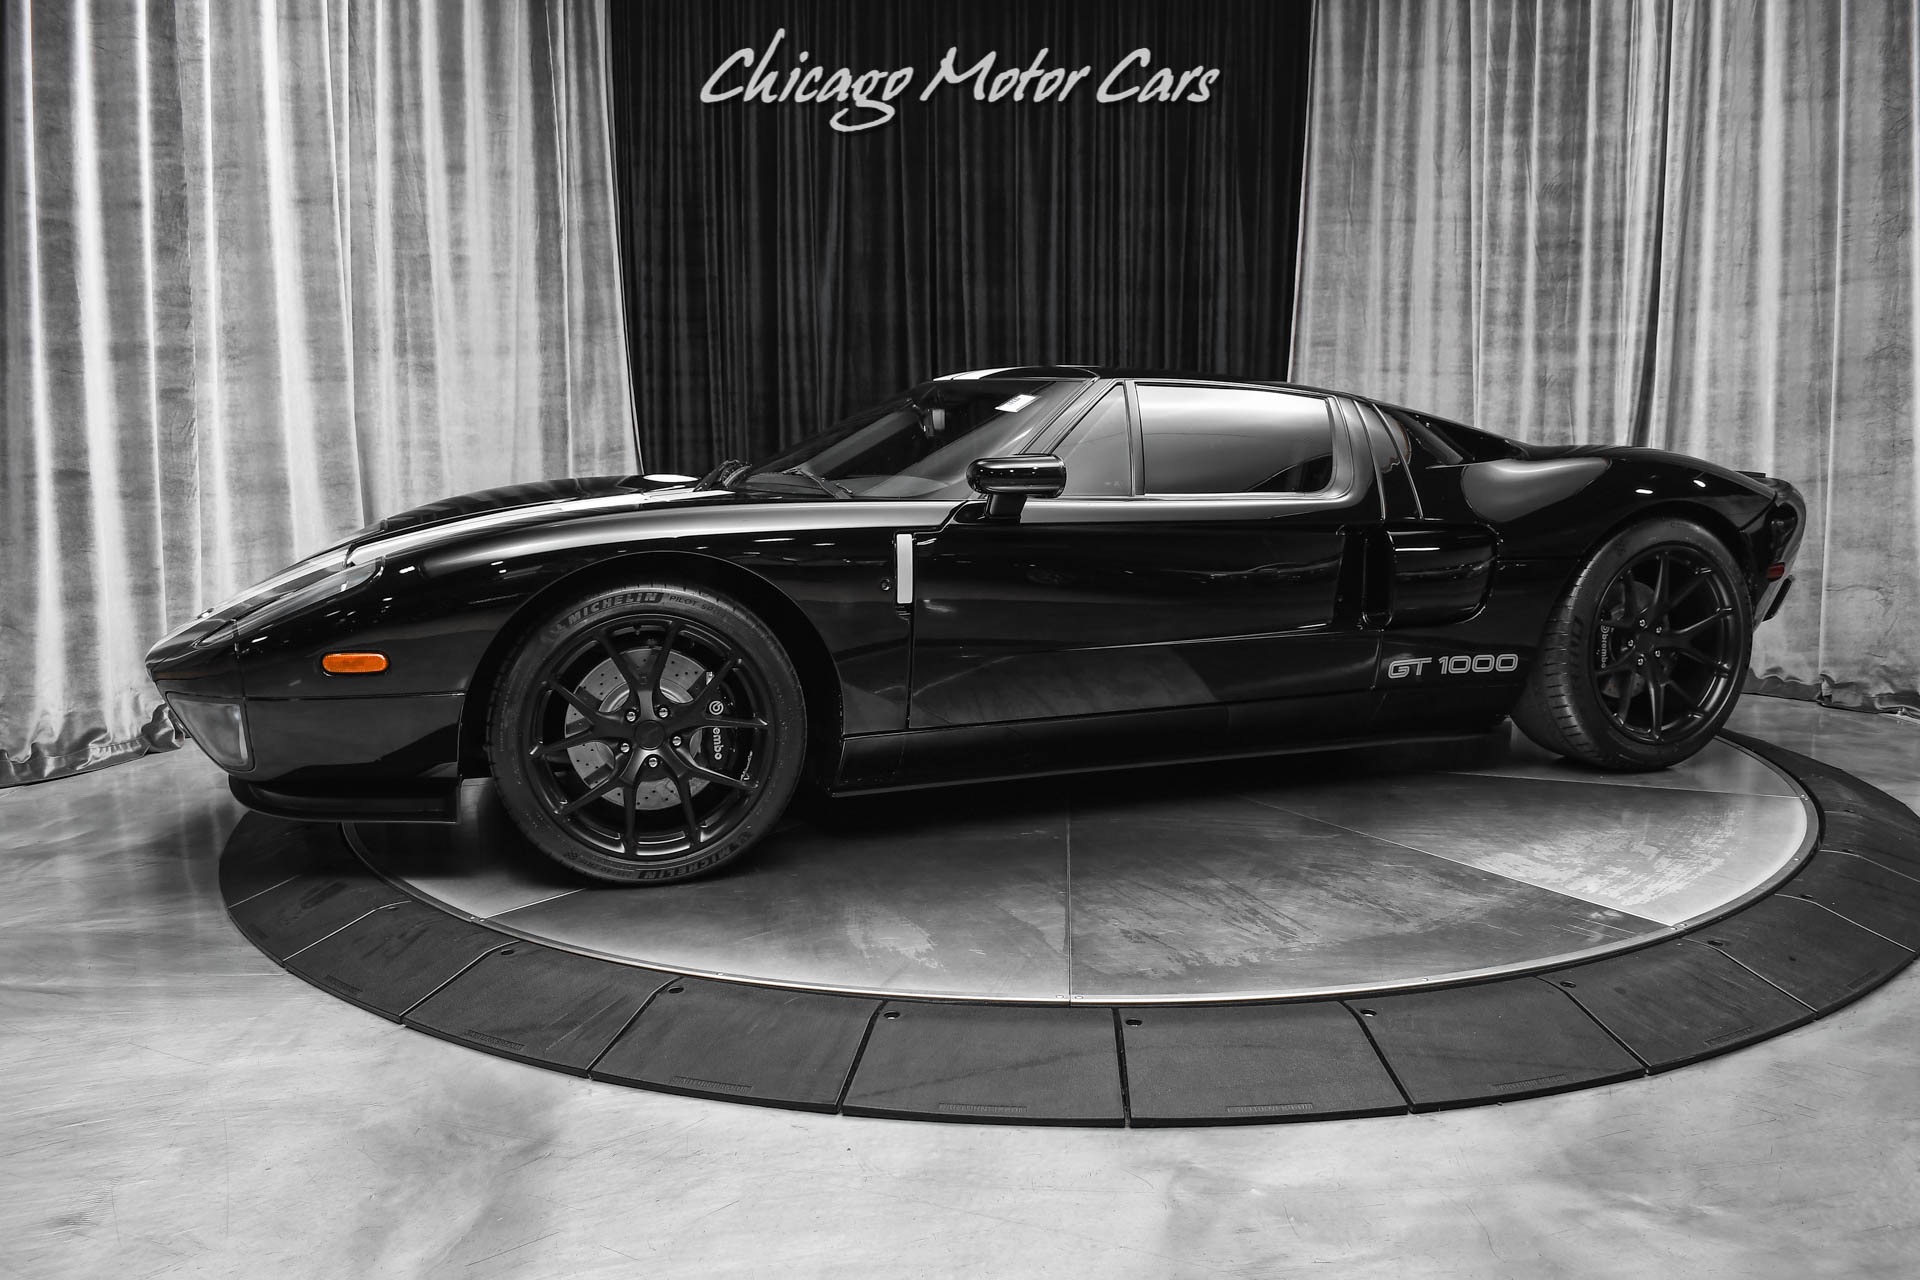 Used-2006-Ford-GT-Coupe-ALL-4-Options-HENNESSEY-GT1000-Package-HRE-Wheels-Black-Stripes